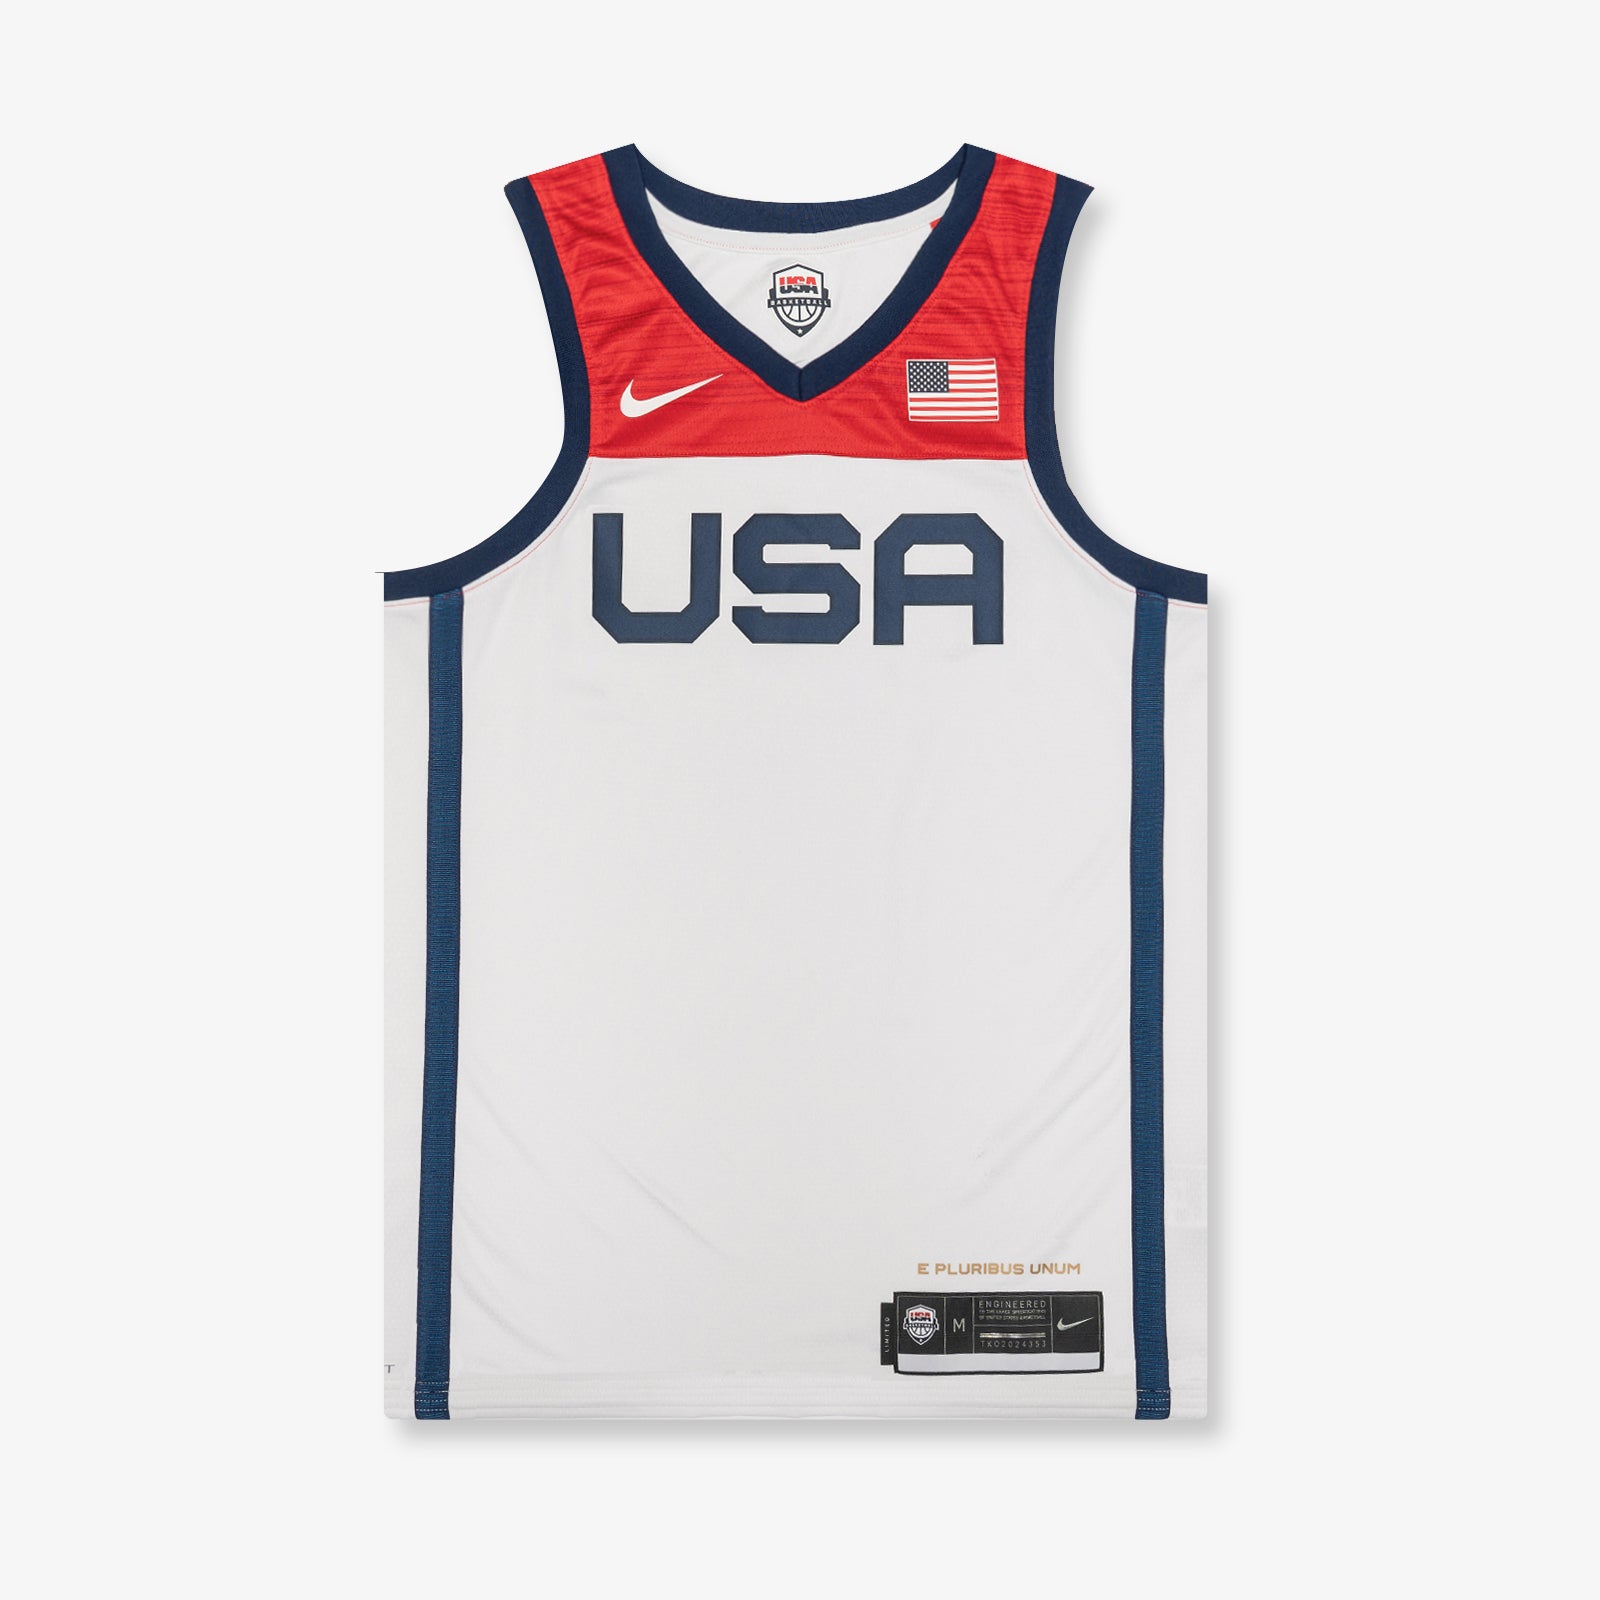 Stephen Curry Nike Team USA Basketball Jersey Size LARGE Red White Blue